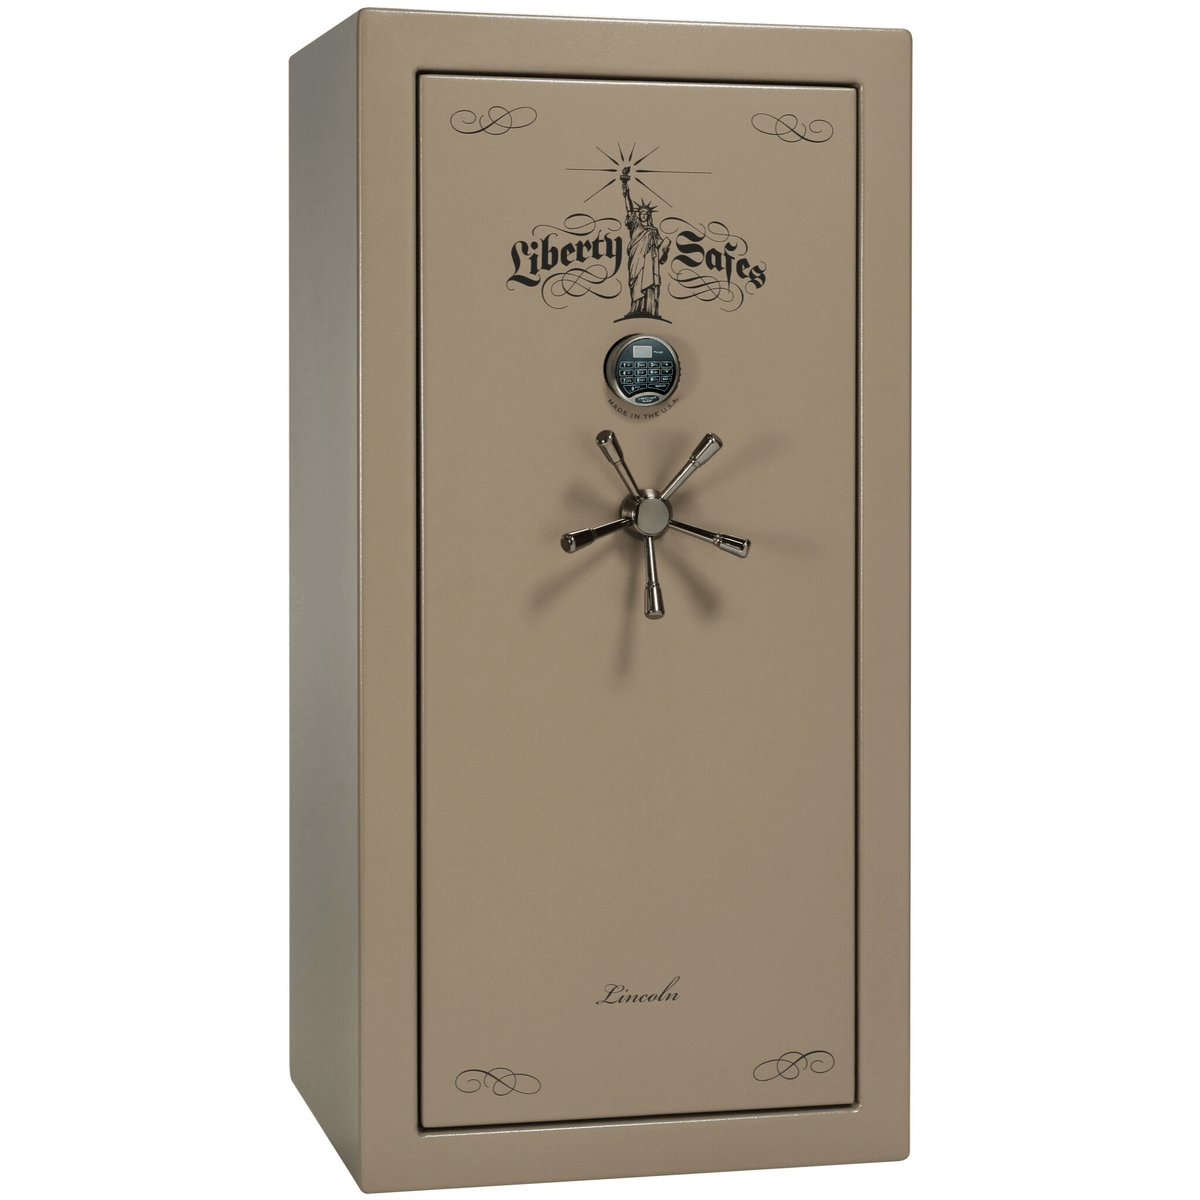 Liberty Lincoln 25 Safe in Champagne Marble with Black Chrome Electronic Lock.